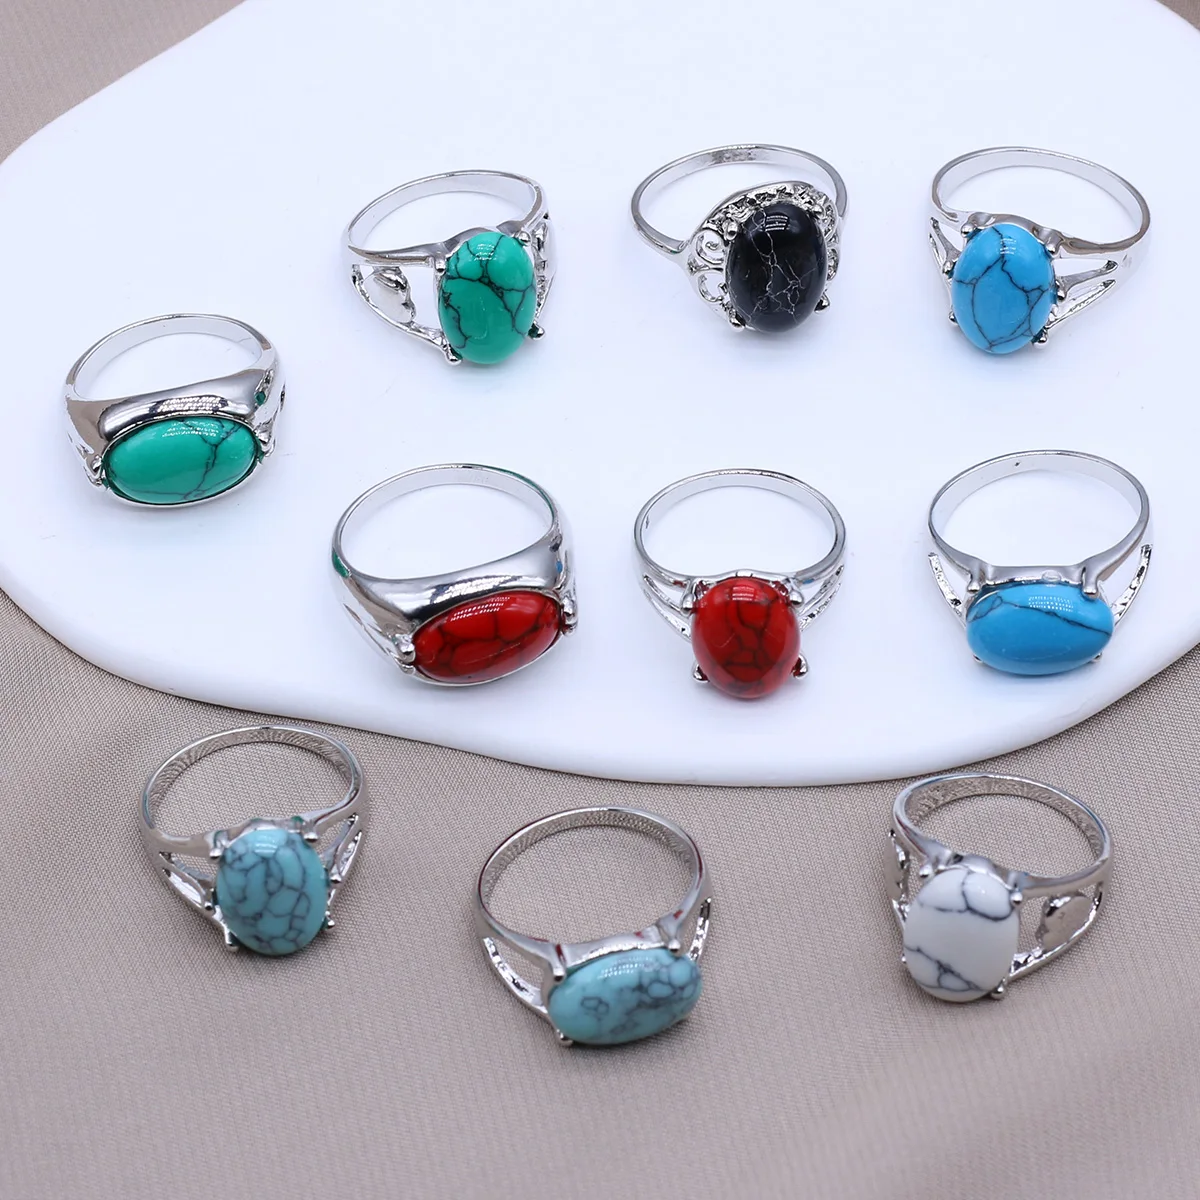 

10Pcs/Lot New Rings for Women Vintage Gem Colorful Turquoise Bohemian Party Girls Set Wedding Ring Jewelry Love Gift